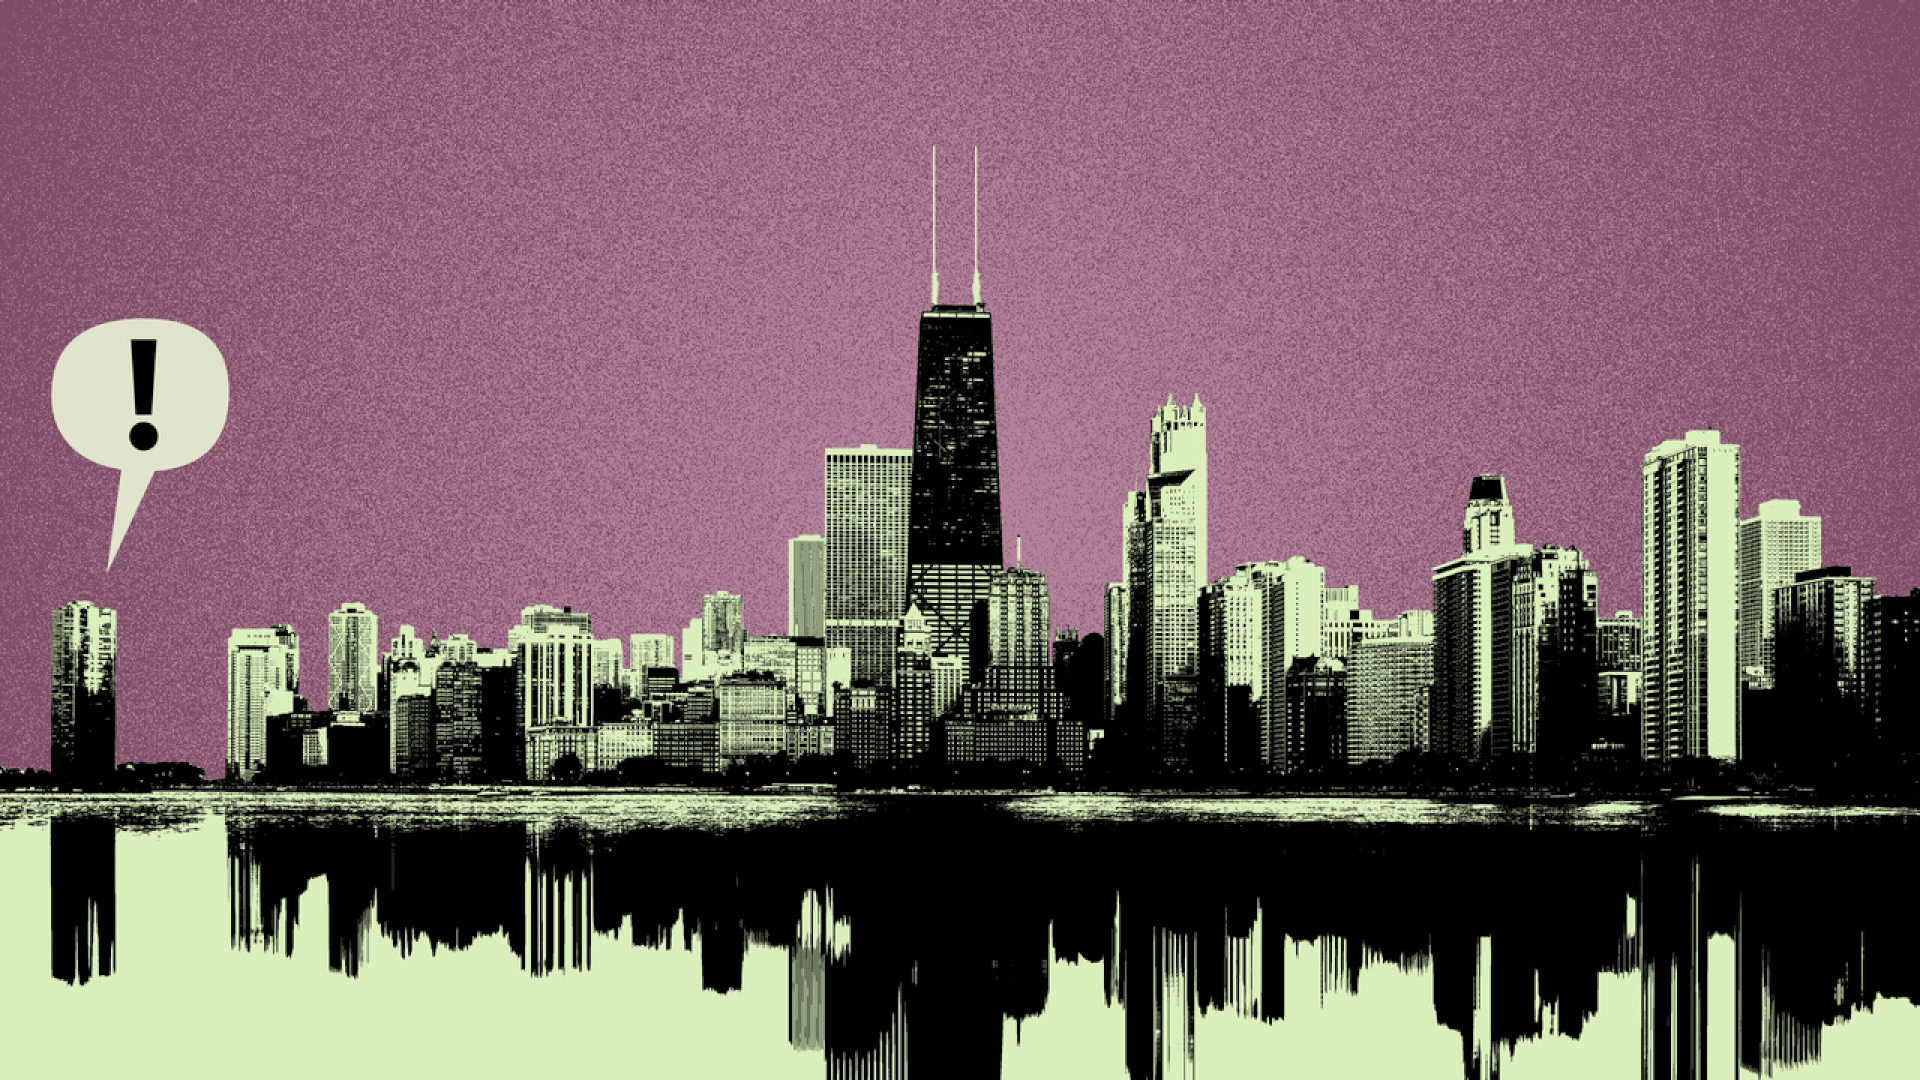 Illustration of the Chicago skyline with word balloons filled with exclamation points popping up over it.